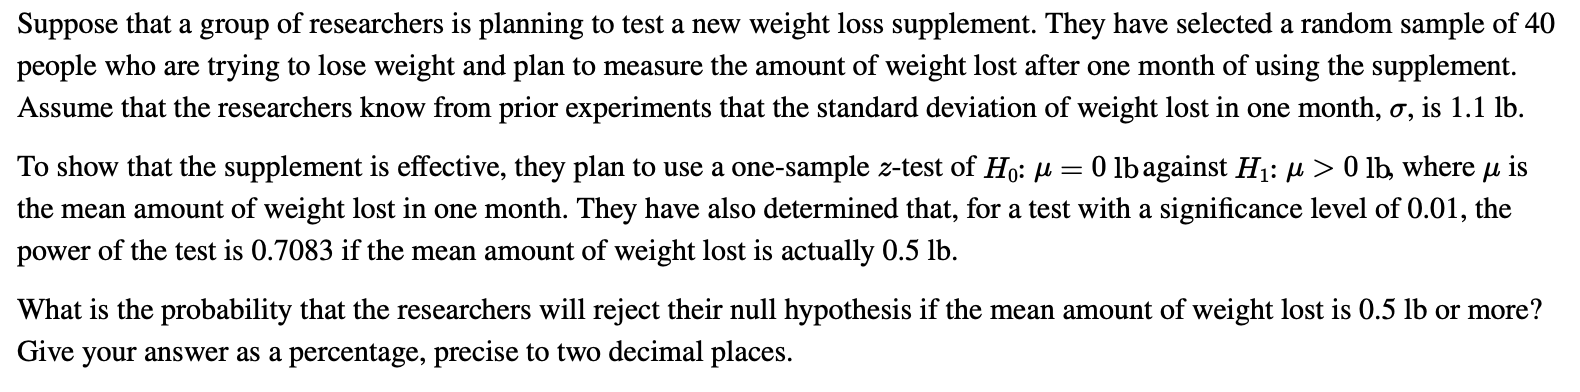 Suppose that a group of researchers is planning to test a new weight loss supplement. They have selected a random sample of 40
people who are trying to lose weight and plan to measure the amount of weight lost after one month of using the supplement.
Assume that the researchers know from prior experiments that the standard deviation of weight lost in one month, ơ, is 1.1 lb.
To show that the supplement is effective, they plan to use a one-sample z-test of Ho: u
the mean amount of weight lost in one month. They have also determined that, for a test with a significance level of 0.01, the
power of the test is 0.7083 if the mean amount of weight lost is actually 0.5 lb.
O lbagainst H1: µ > 0 lb, where µ is
What is the probability that the researchers will reject their null hypothesis if the mean amount of weight lost is 0.5 lb or more?
Give your answer as a percentage, precise to two decimal places.
